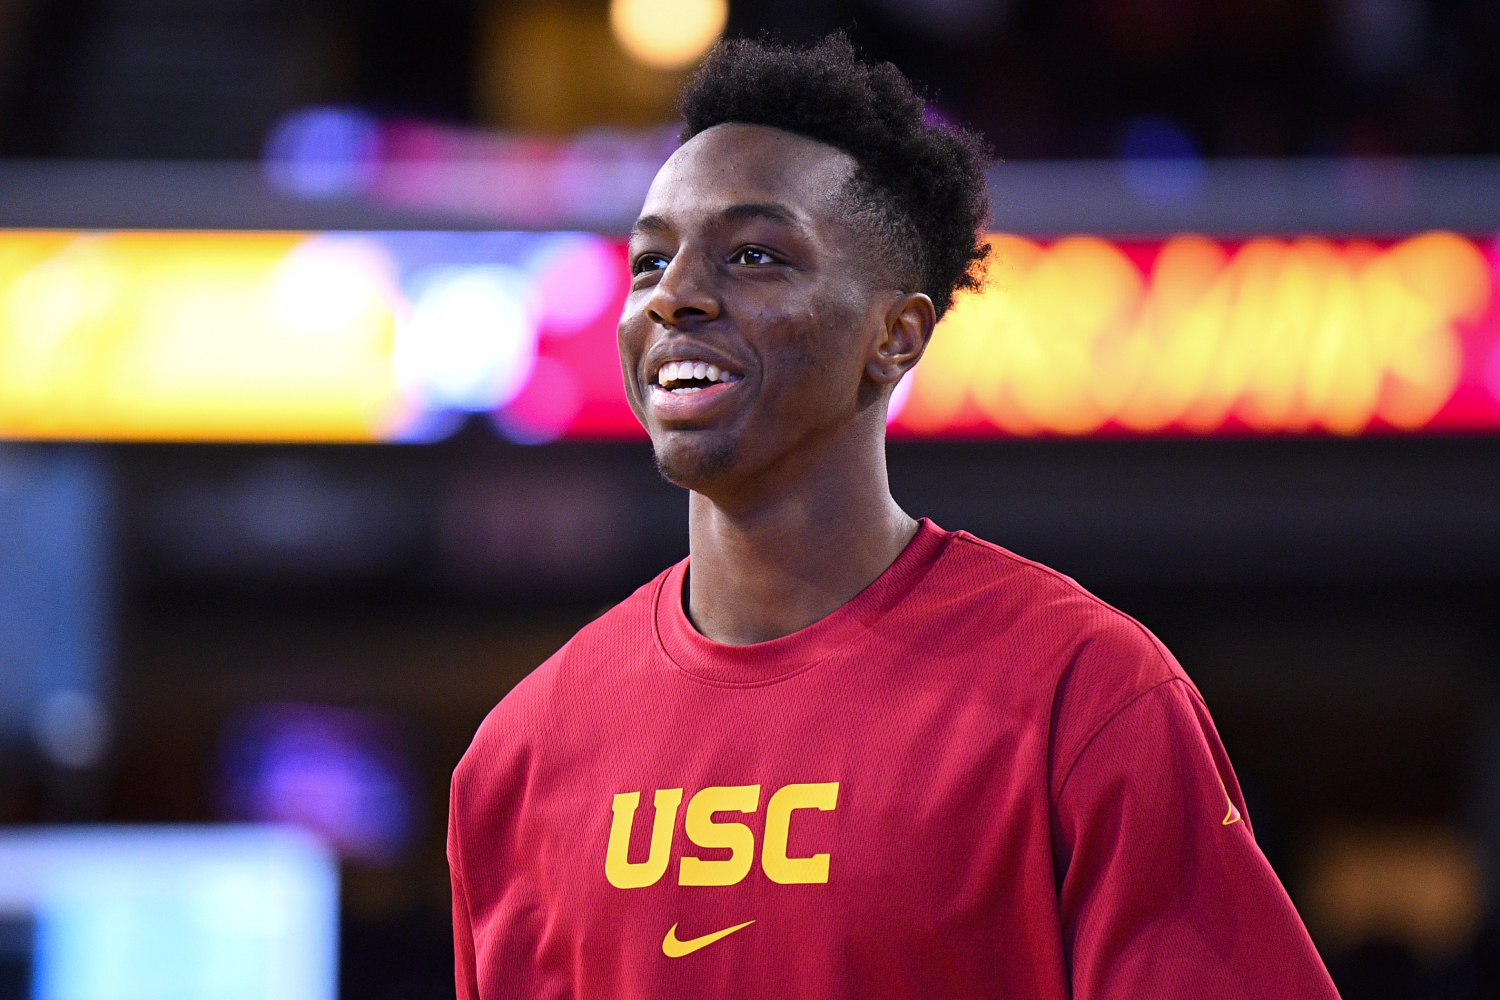 Onyeka Okongwu is one of the biggest stars in the 2020 NBA draft class. So, here is everything you need to know about the former USC Trojan.